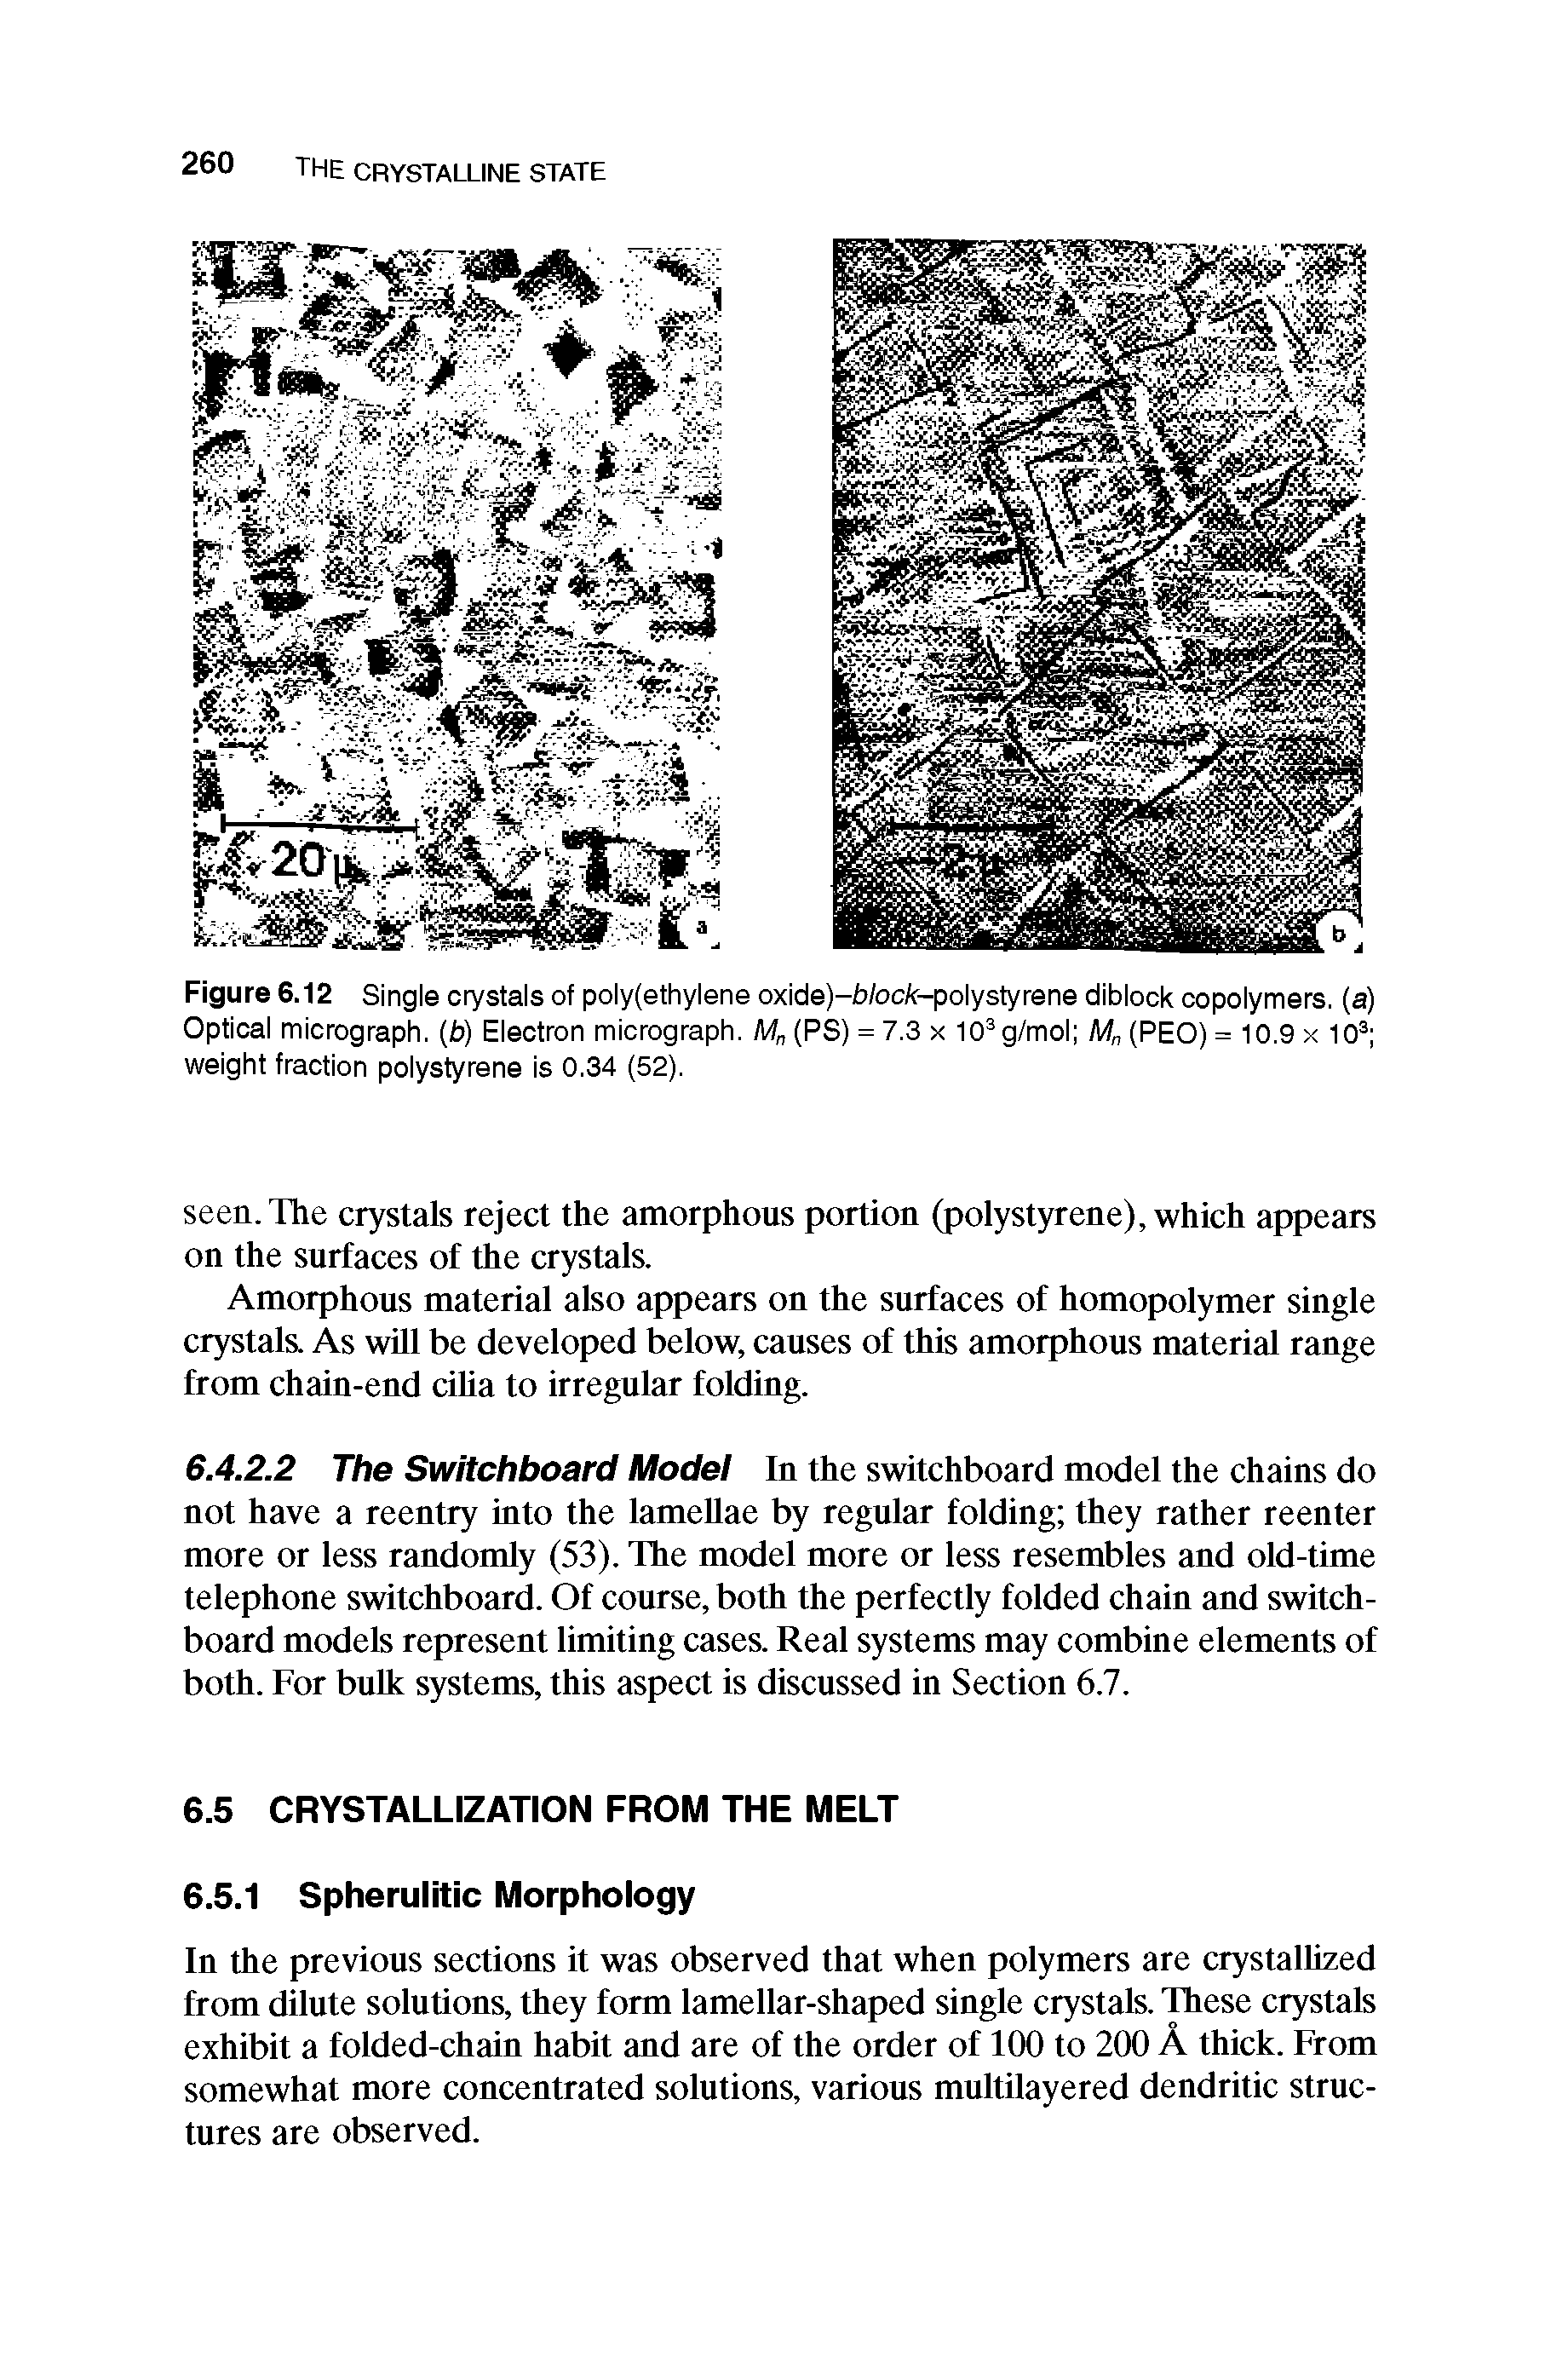 Figure 6.12 Single crystals of poly(ethylene oxide)-Woc/c-polystyrene diblock copolymers, (a) Optical micrograph, (b) Electron micrograph. M (PS) = 7.3 x lO g/mol M (PEO) = 10.9 x 10 weight fraction polystyrene is 0.34 (52).